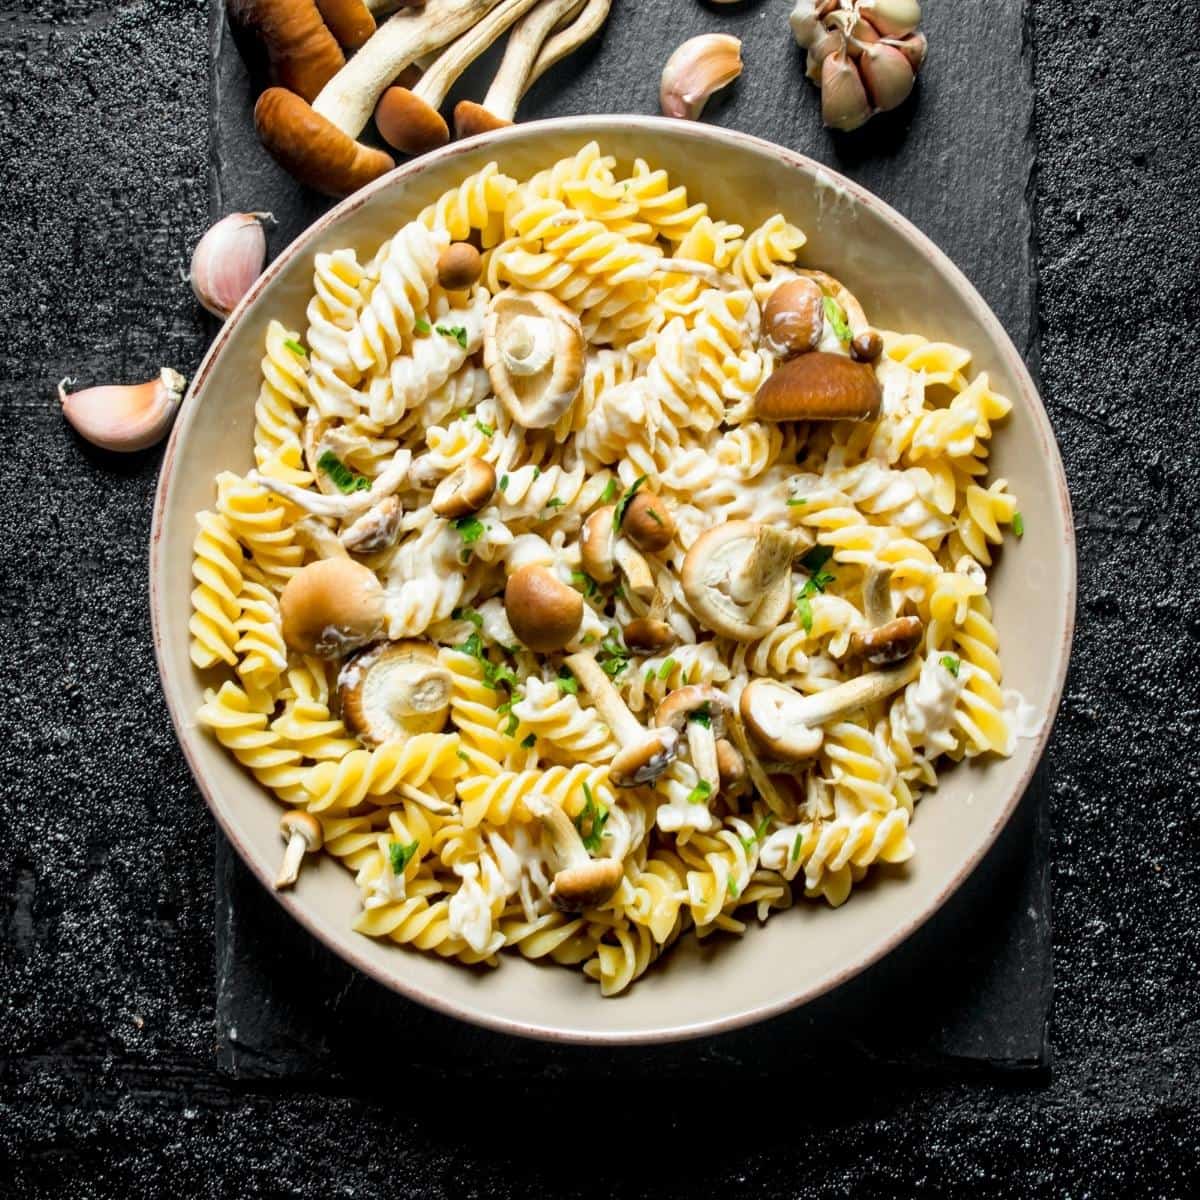 A bowl of food on a plate, with Pasta